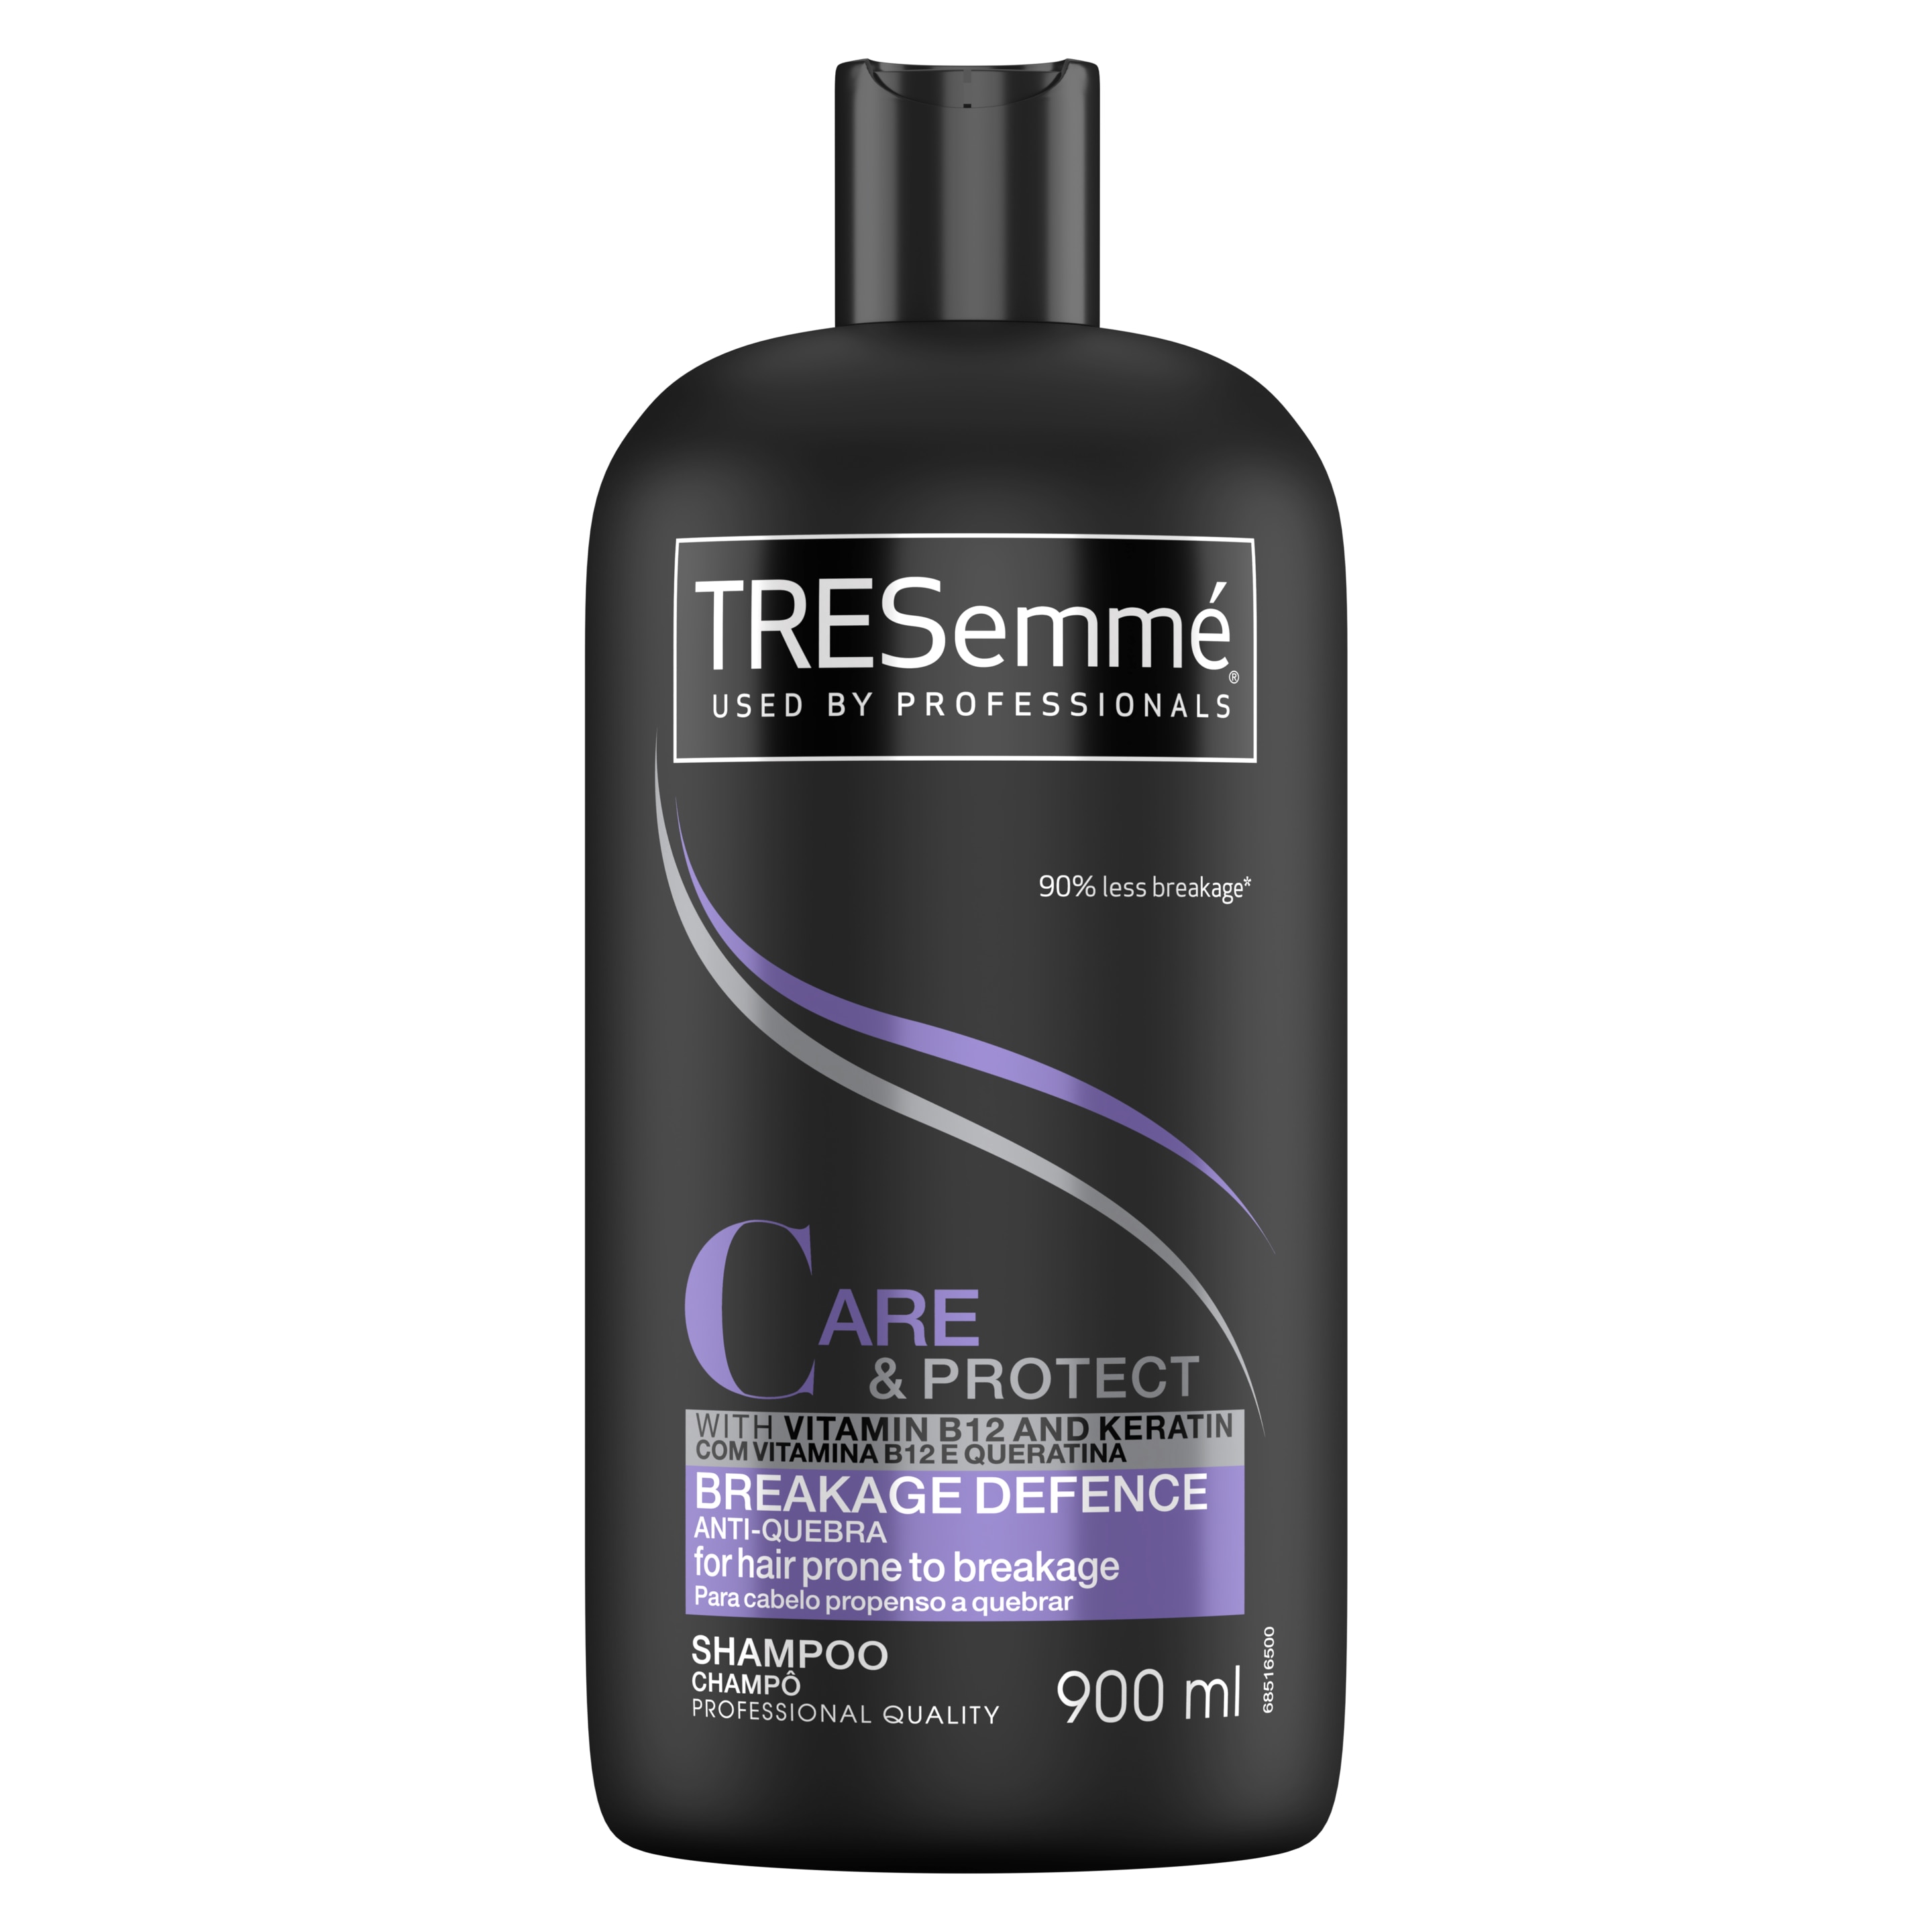 TRESemmé Care & Protect Shampoo 900ml Front of pack image